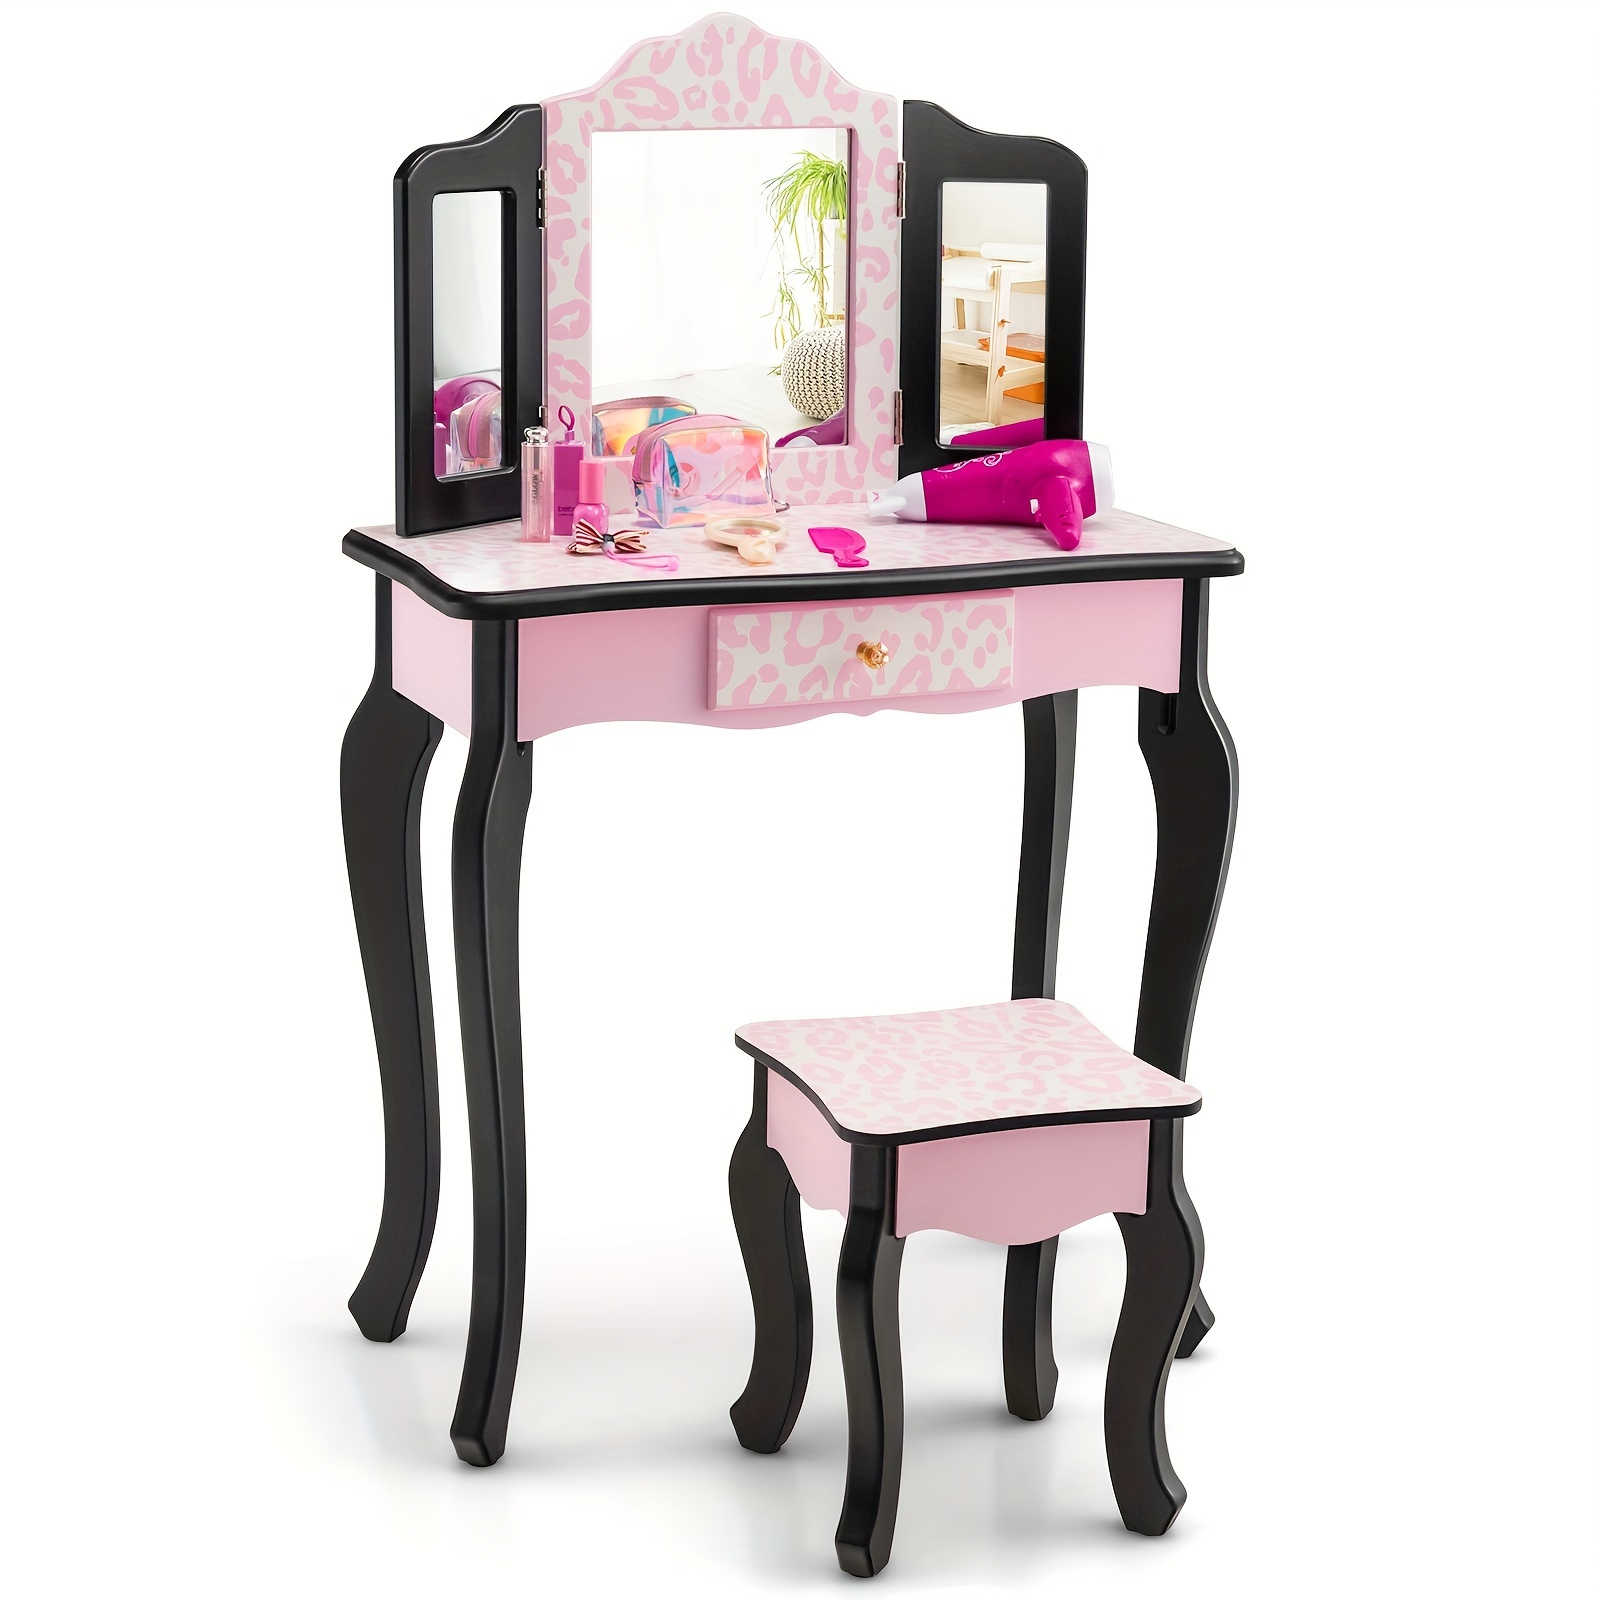 

1 Set Kids Pretend Play Vanity Set, Princess Makeup Dressing Table With Detachable Top, Tri-folding Mirror, Drawer, Stool, 2-in-1 Wooden Writing Desk For Toddlers, Pink